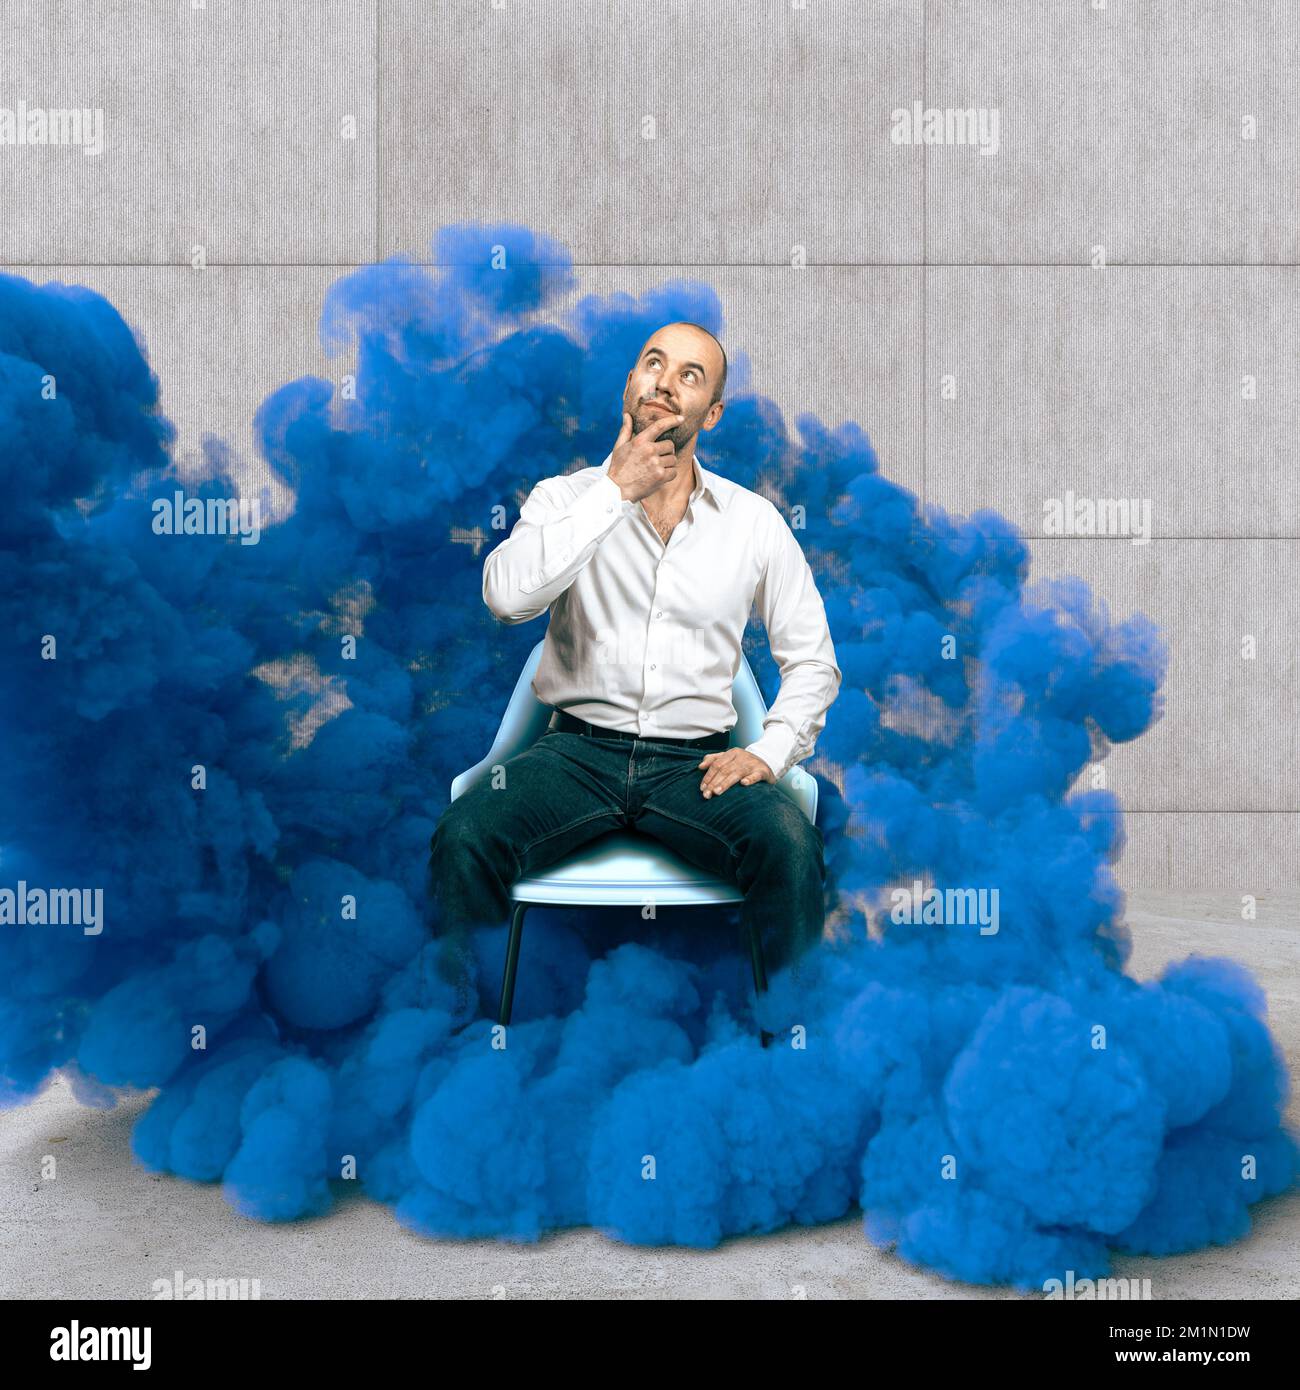 pensive man sitting wrapped in blue smoke, creativity concept Stock Photo